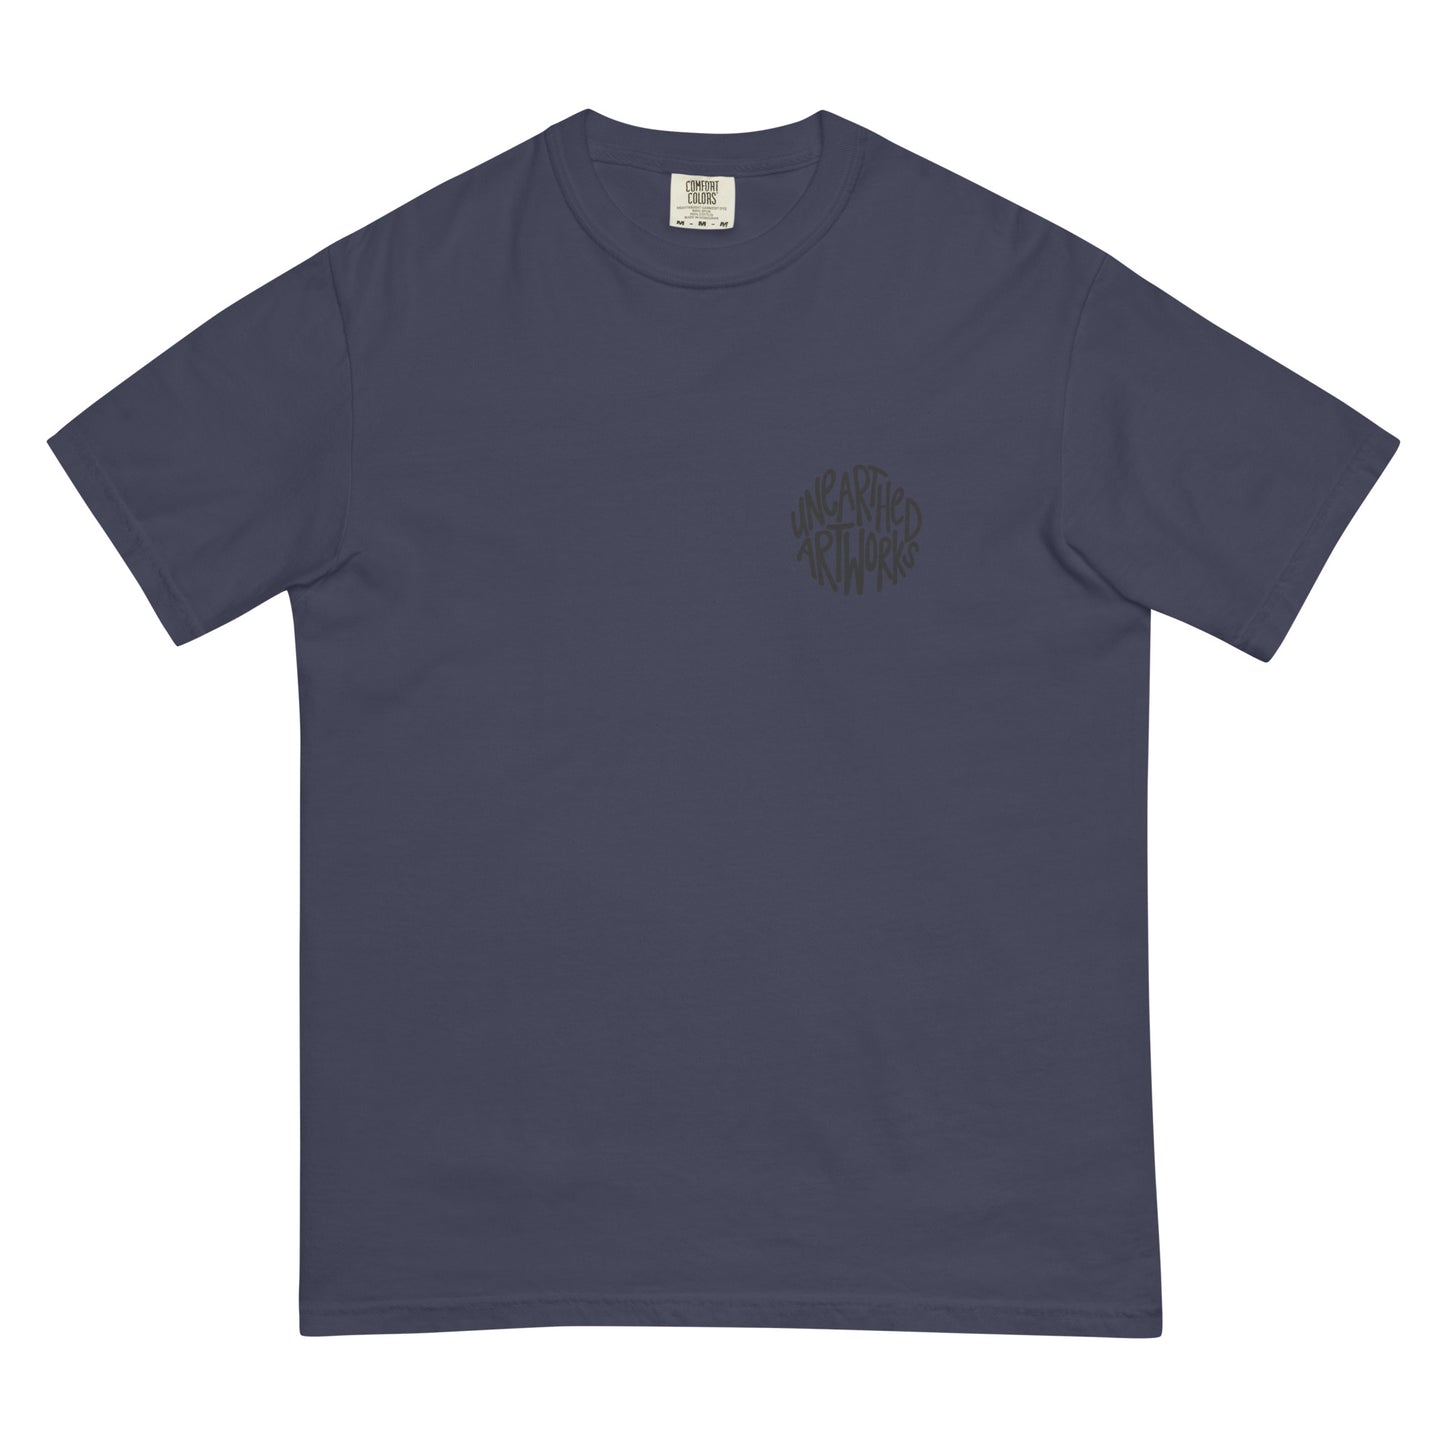 unearthed logo garment-dyed heavyweight t-shirt